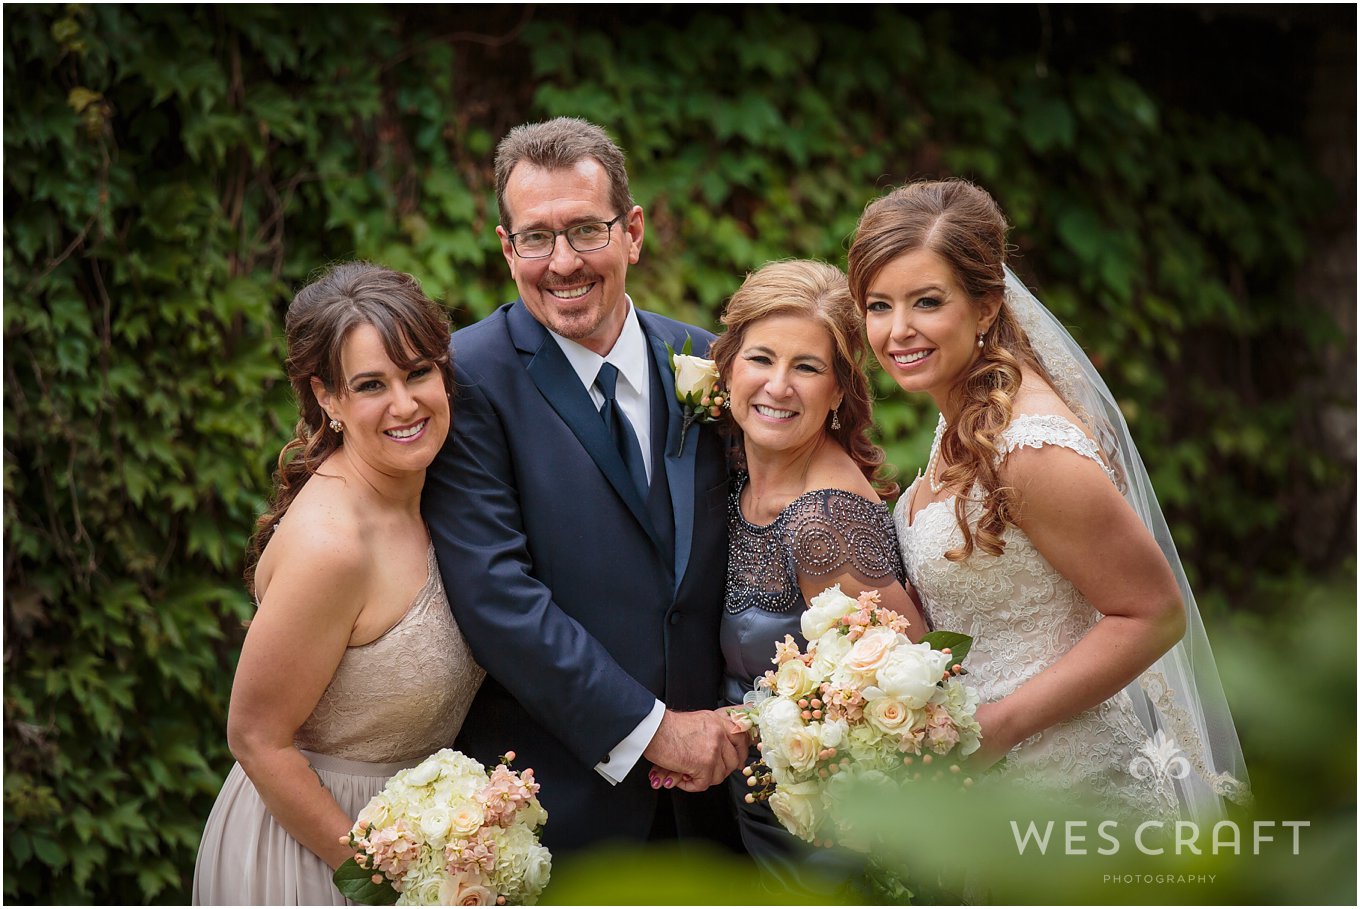 We stepped outside with Jennifer's family for some pre-ceremony portraits utilizing lush ivy covered walls.